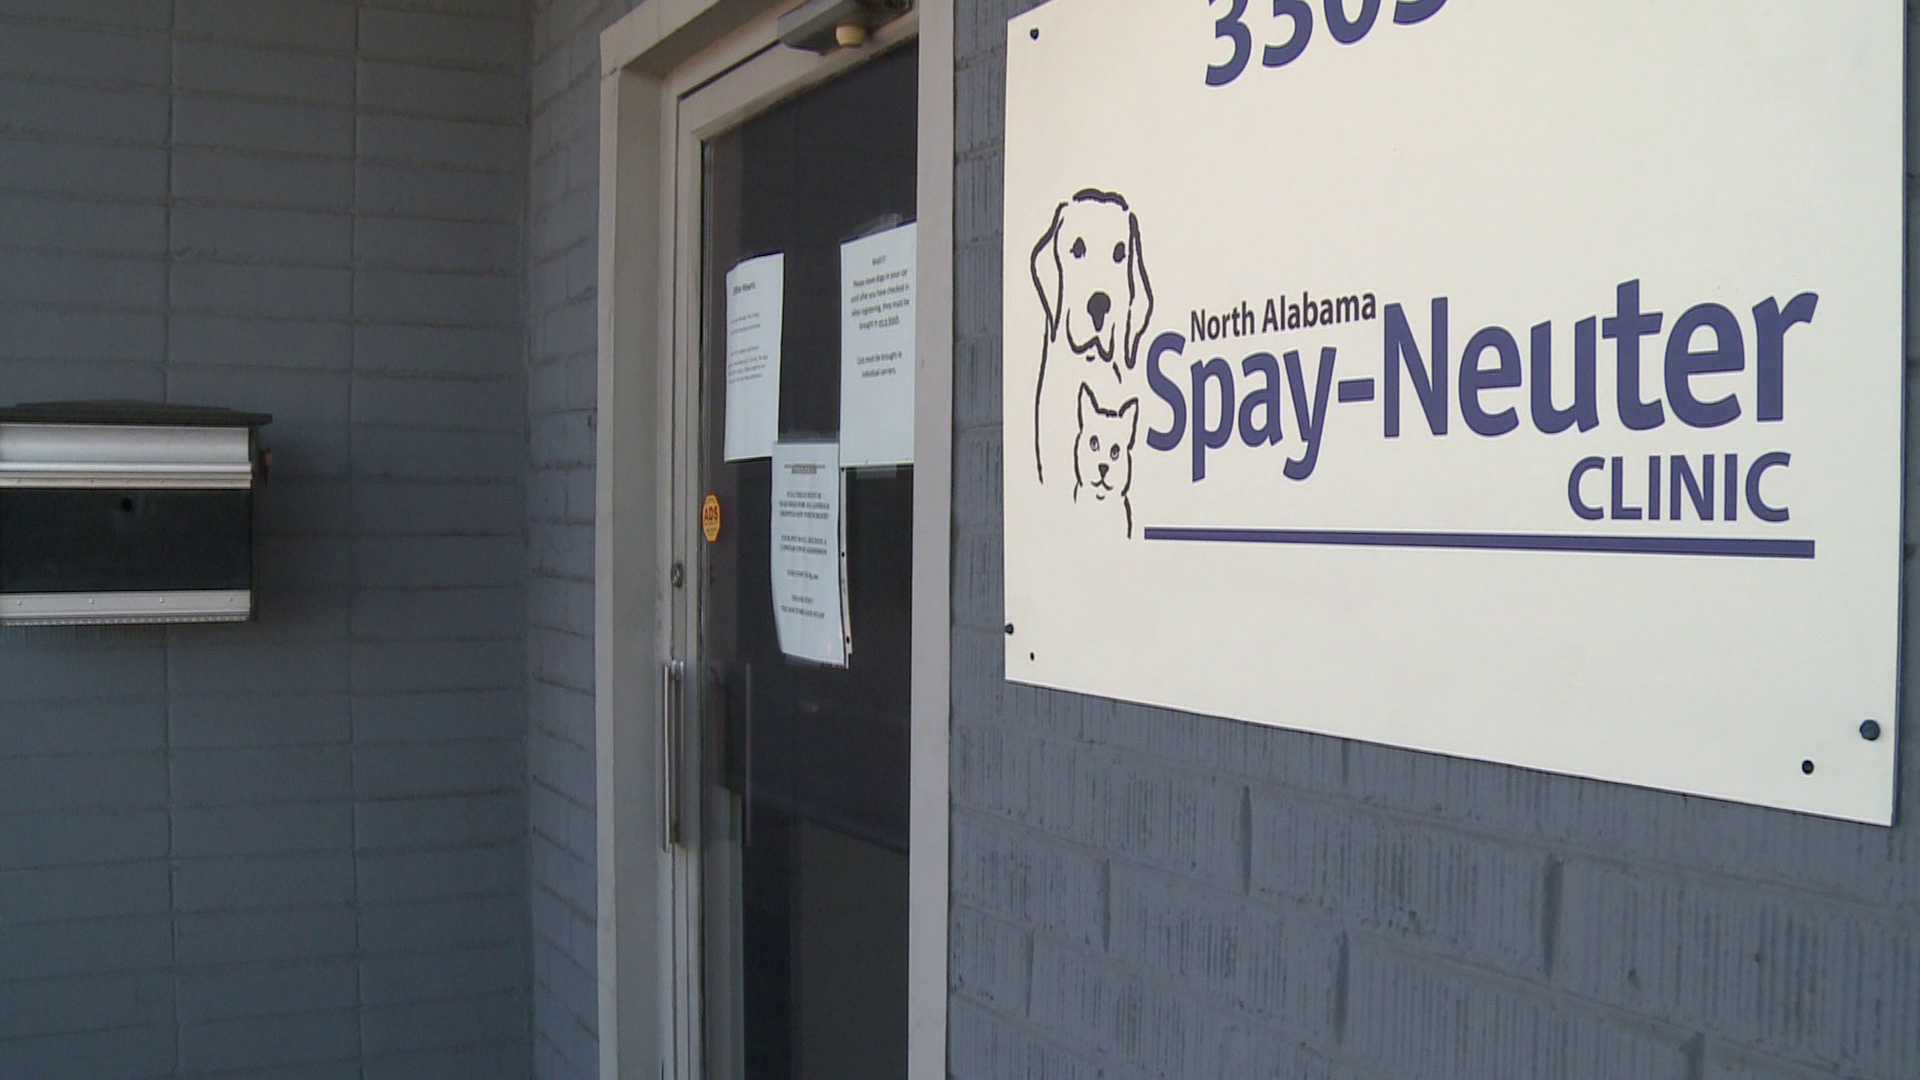 Huntsville Animal Services Remind Residents Of Low Cost Spay Neuter